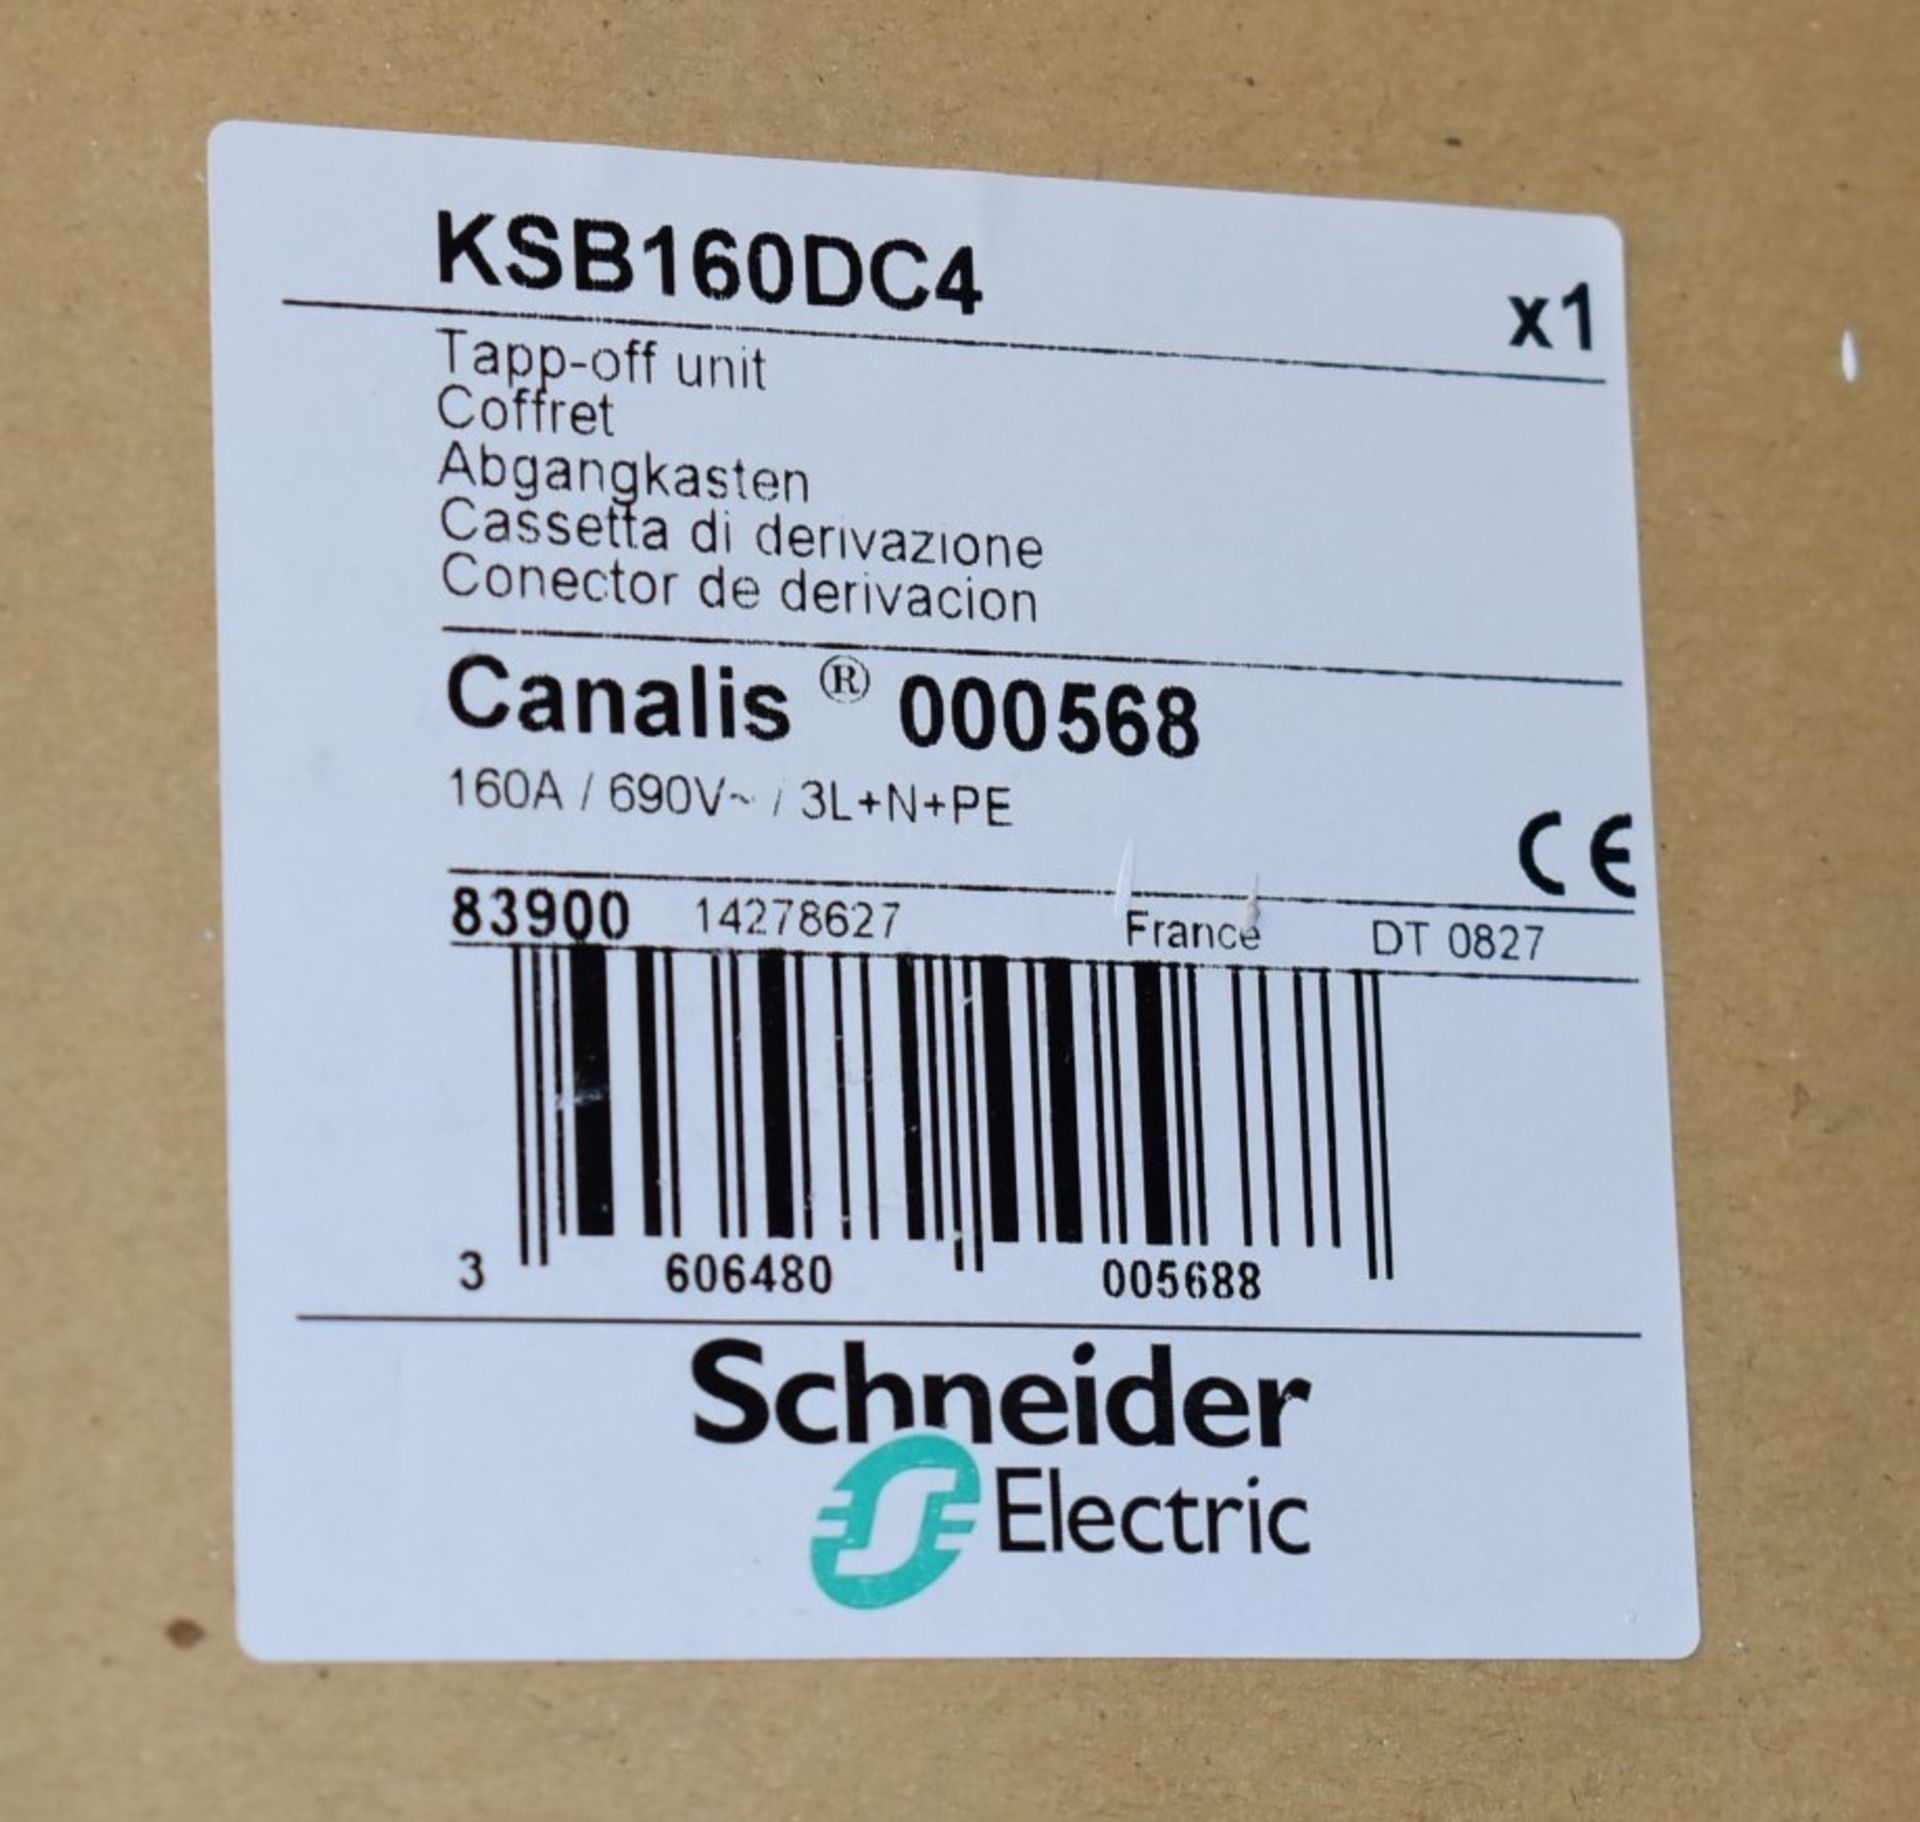 1 x Schneider Electric Canalis 160A Tap Off Unit - Type: KSB160DC4 - New Sealed Stock - RRP £910 - Image 3 of 3